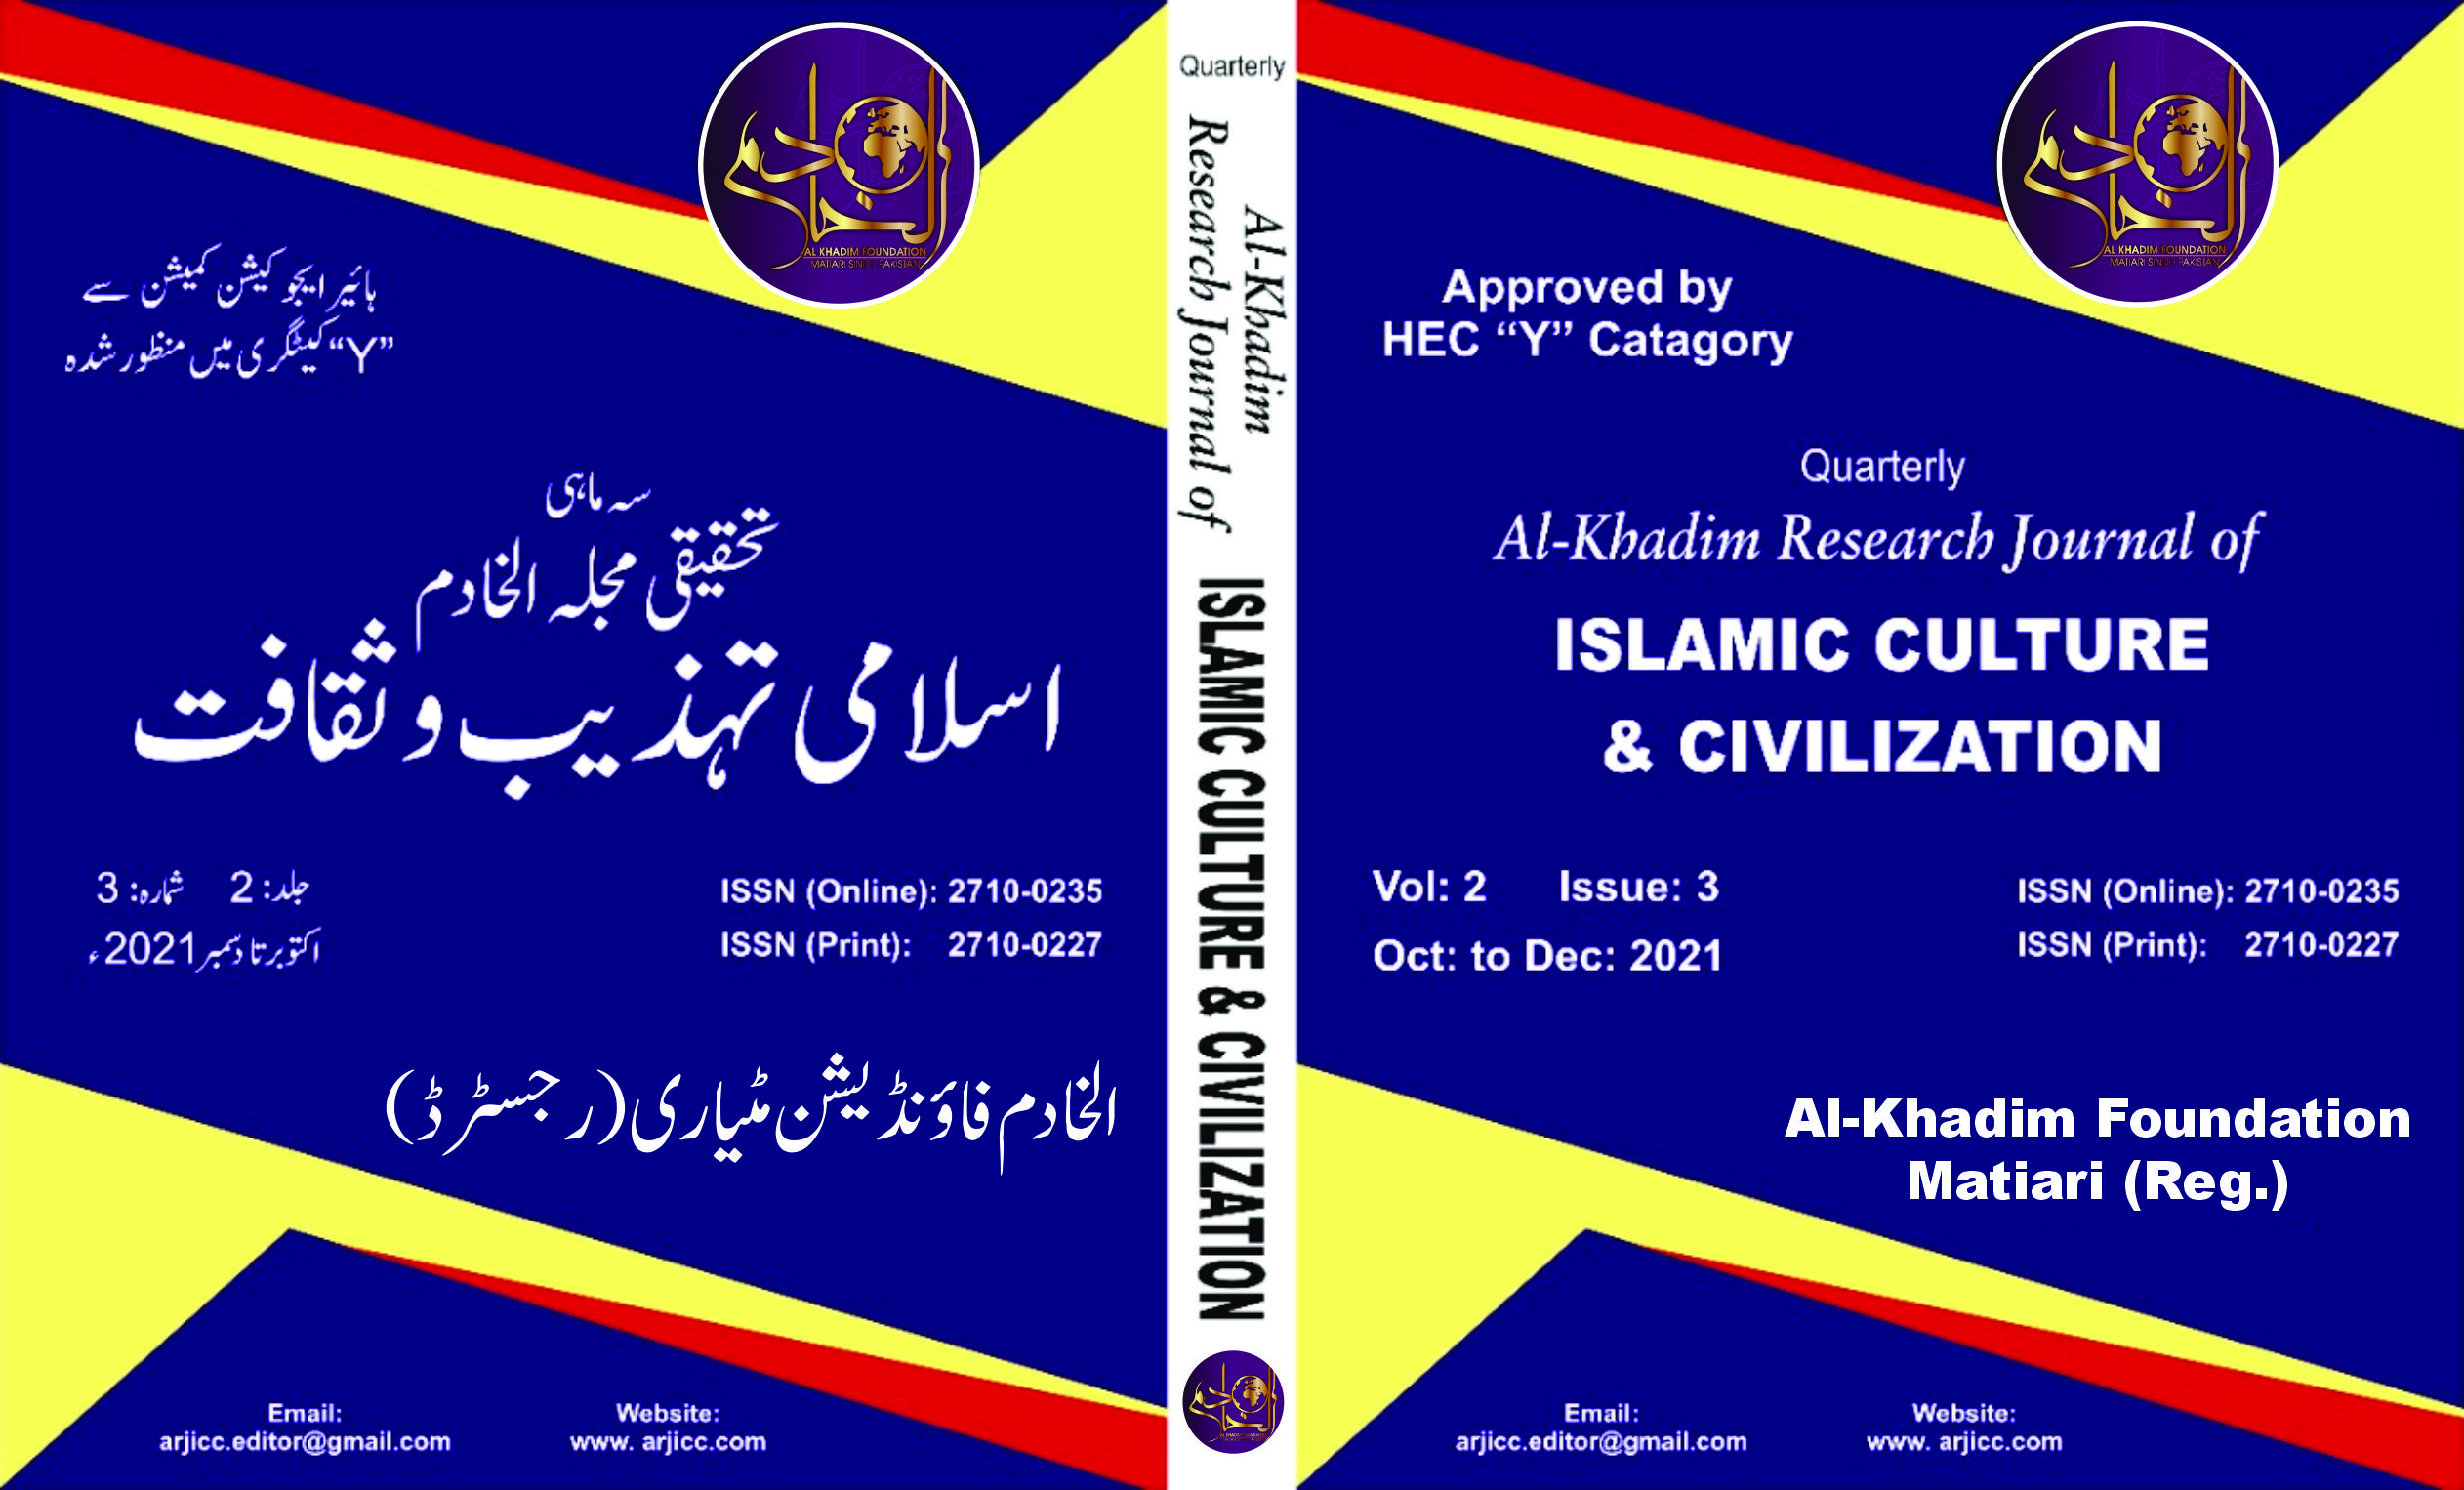 					View Vol. 2 No. 3 (2021):  Al Khadim Research journal of Islamic culture and Civilization (October to December 2021)
				